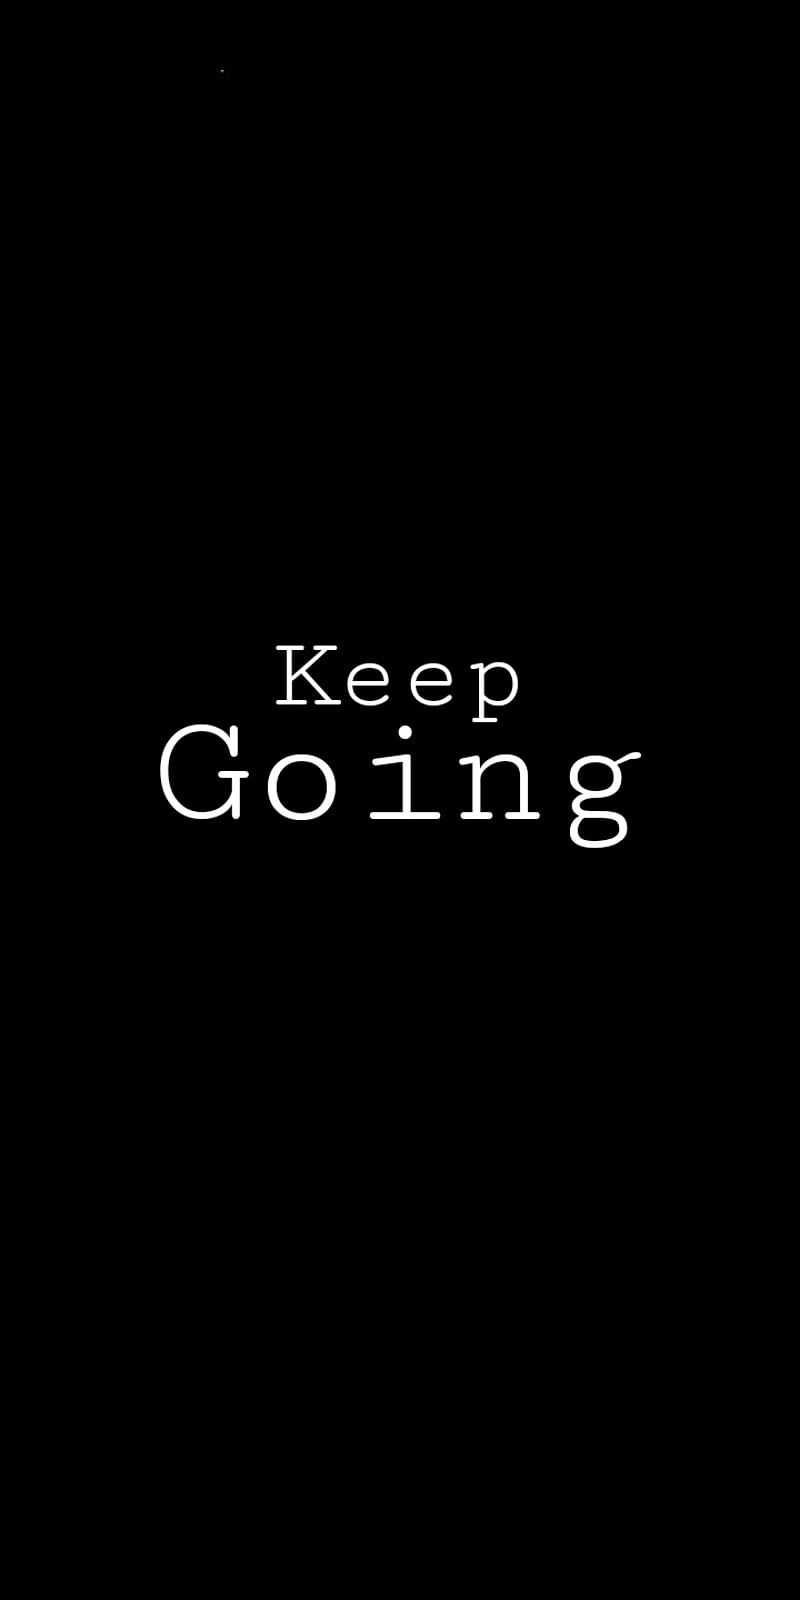 Keep going. - Black quotes